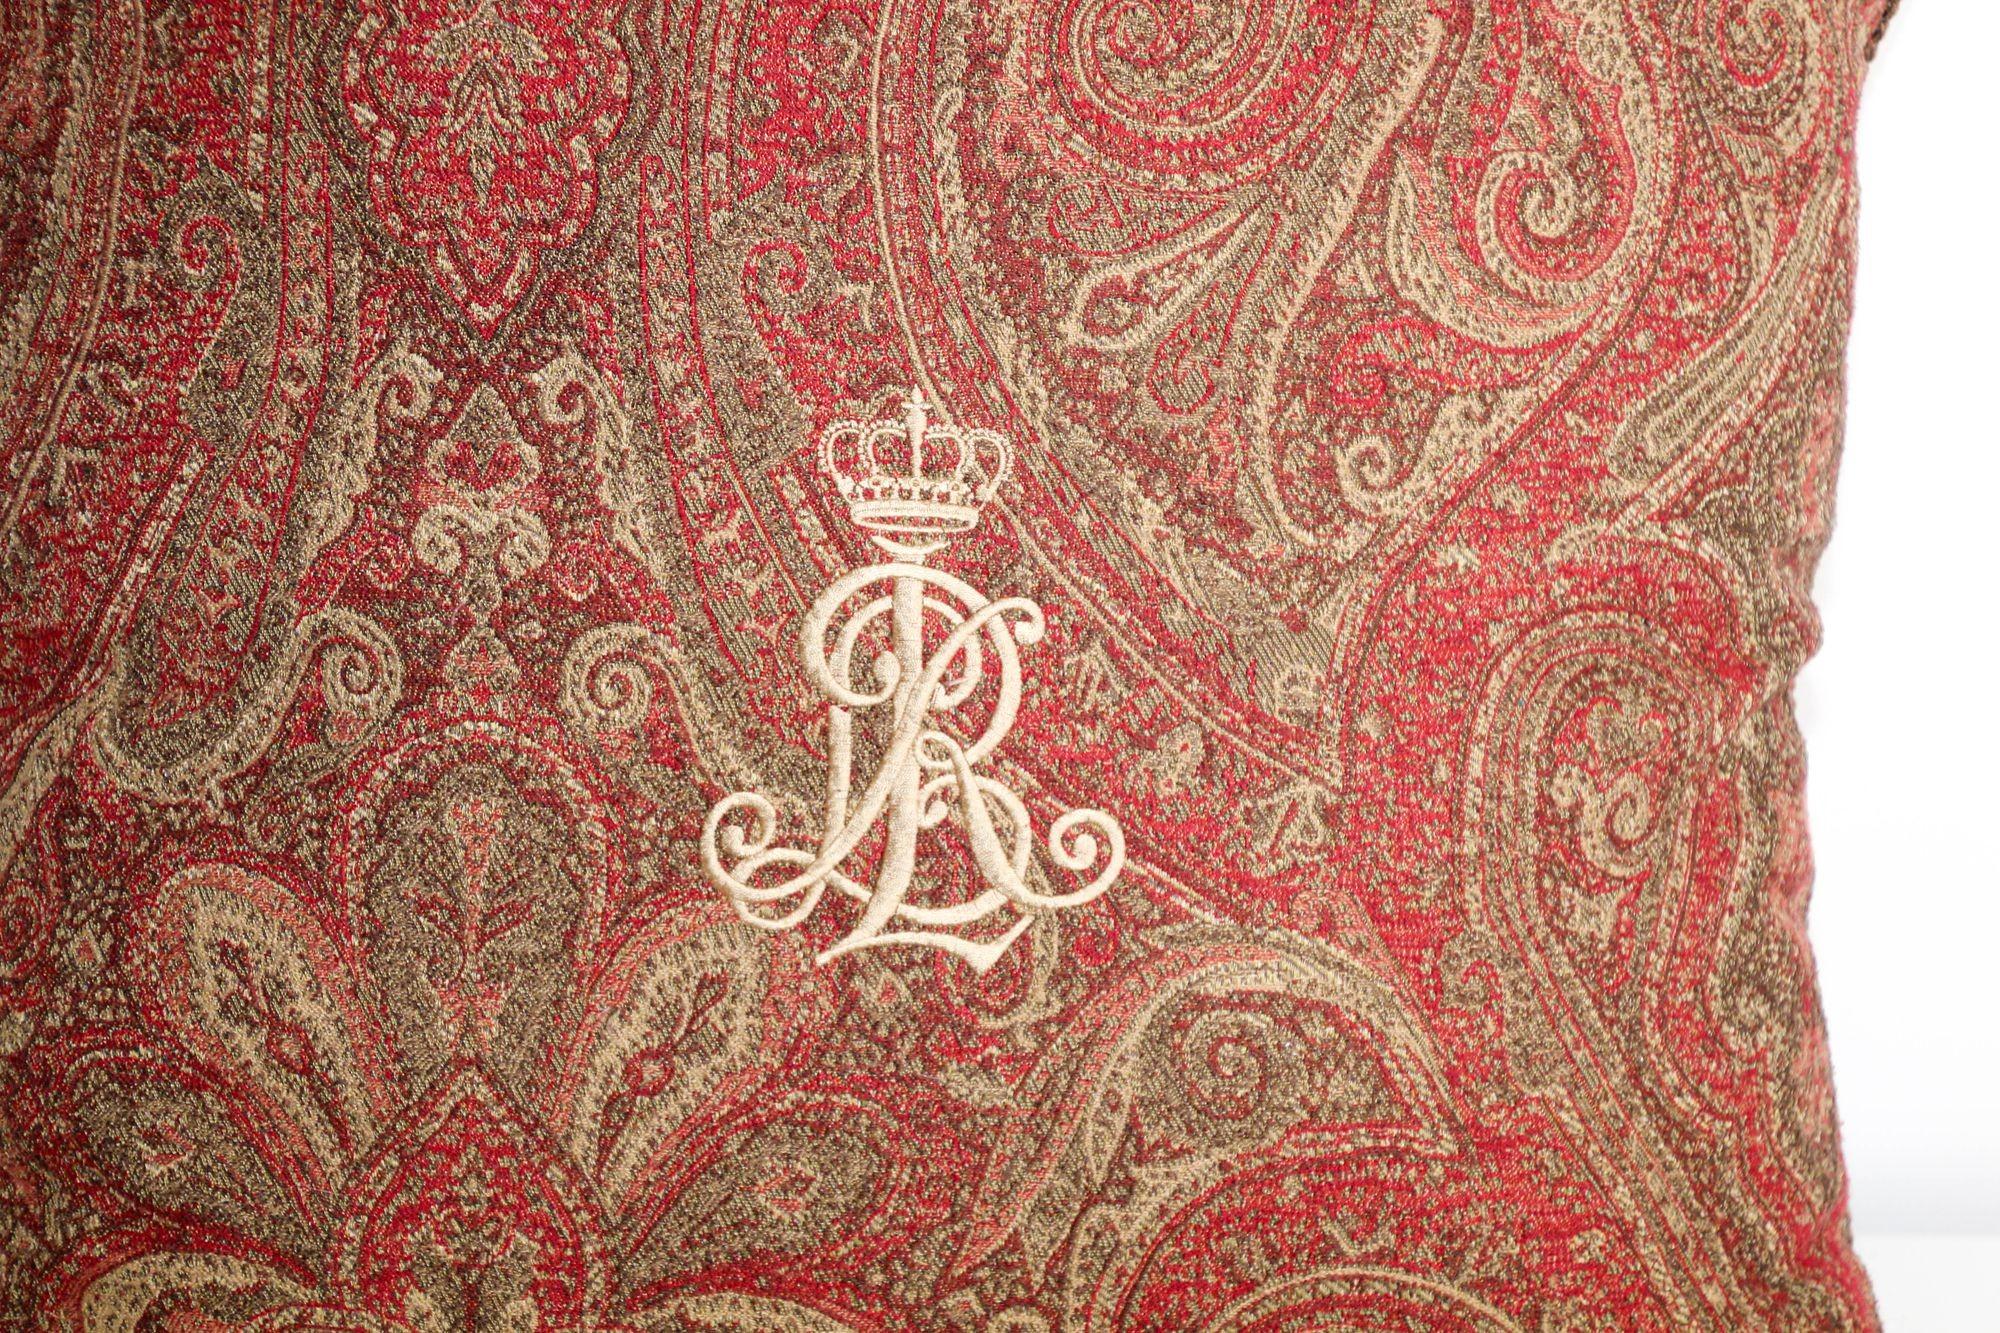 Embroidered Ralph Lauren Pillow in Red and Gold Paisley RL Crown Logo